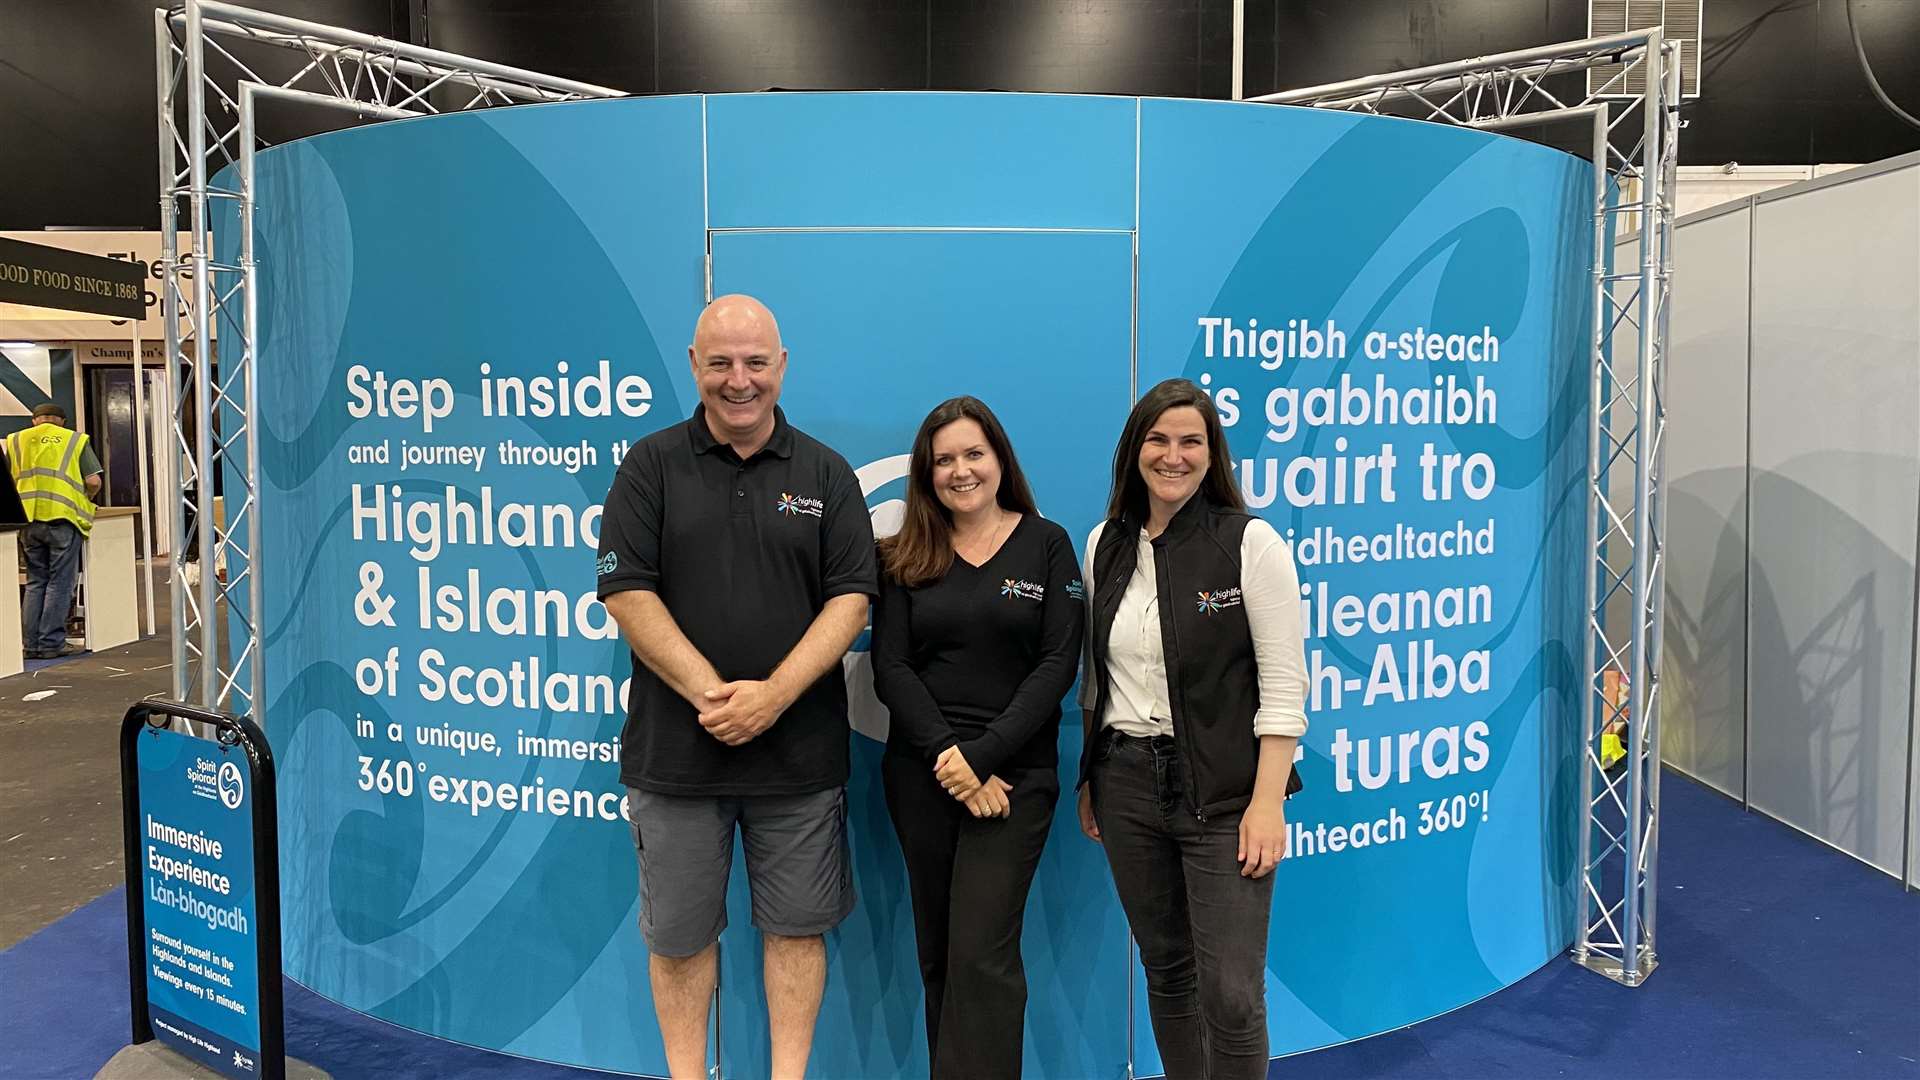 Liam Christie, Mary-Dawn Mohun and Stephanie Reith, working on the Spirit of the Highlands Islands project and will be at the show.